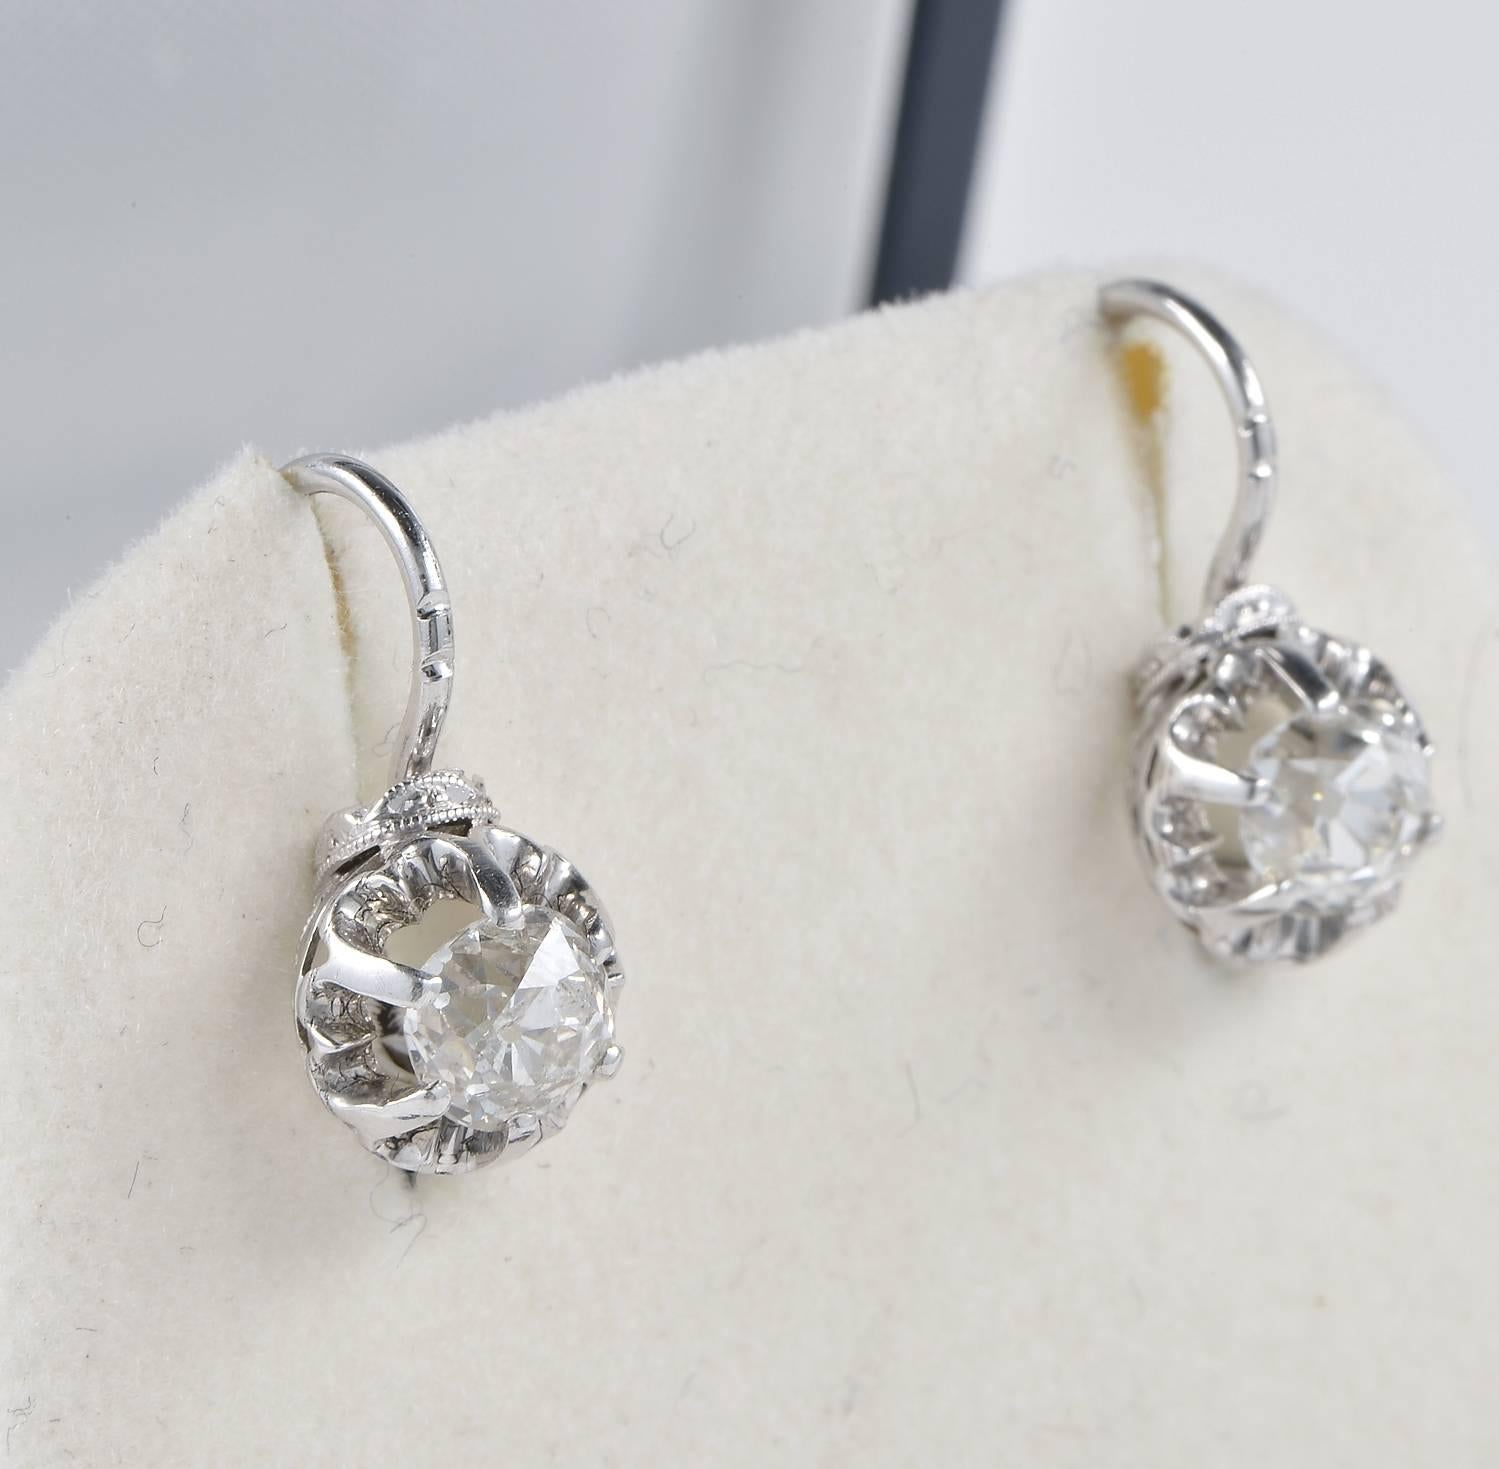 Authentic Art Deco Diamond solitaire earrings, boasting two old mine cut Diamonds G/H colour VVS for one I grade for the other Diamond. Rare, antique Diamonds of good size make a must have for this pair of earrings. Feminine and enchanting the way